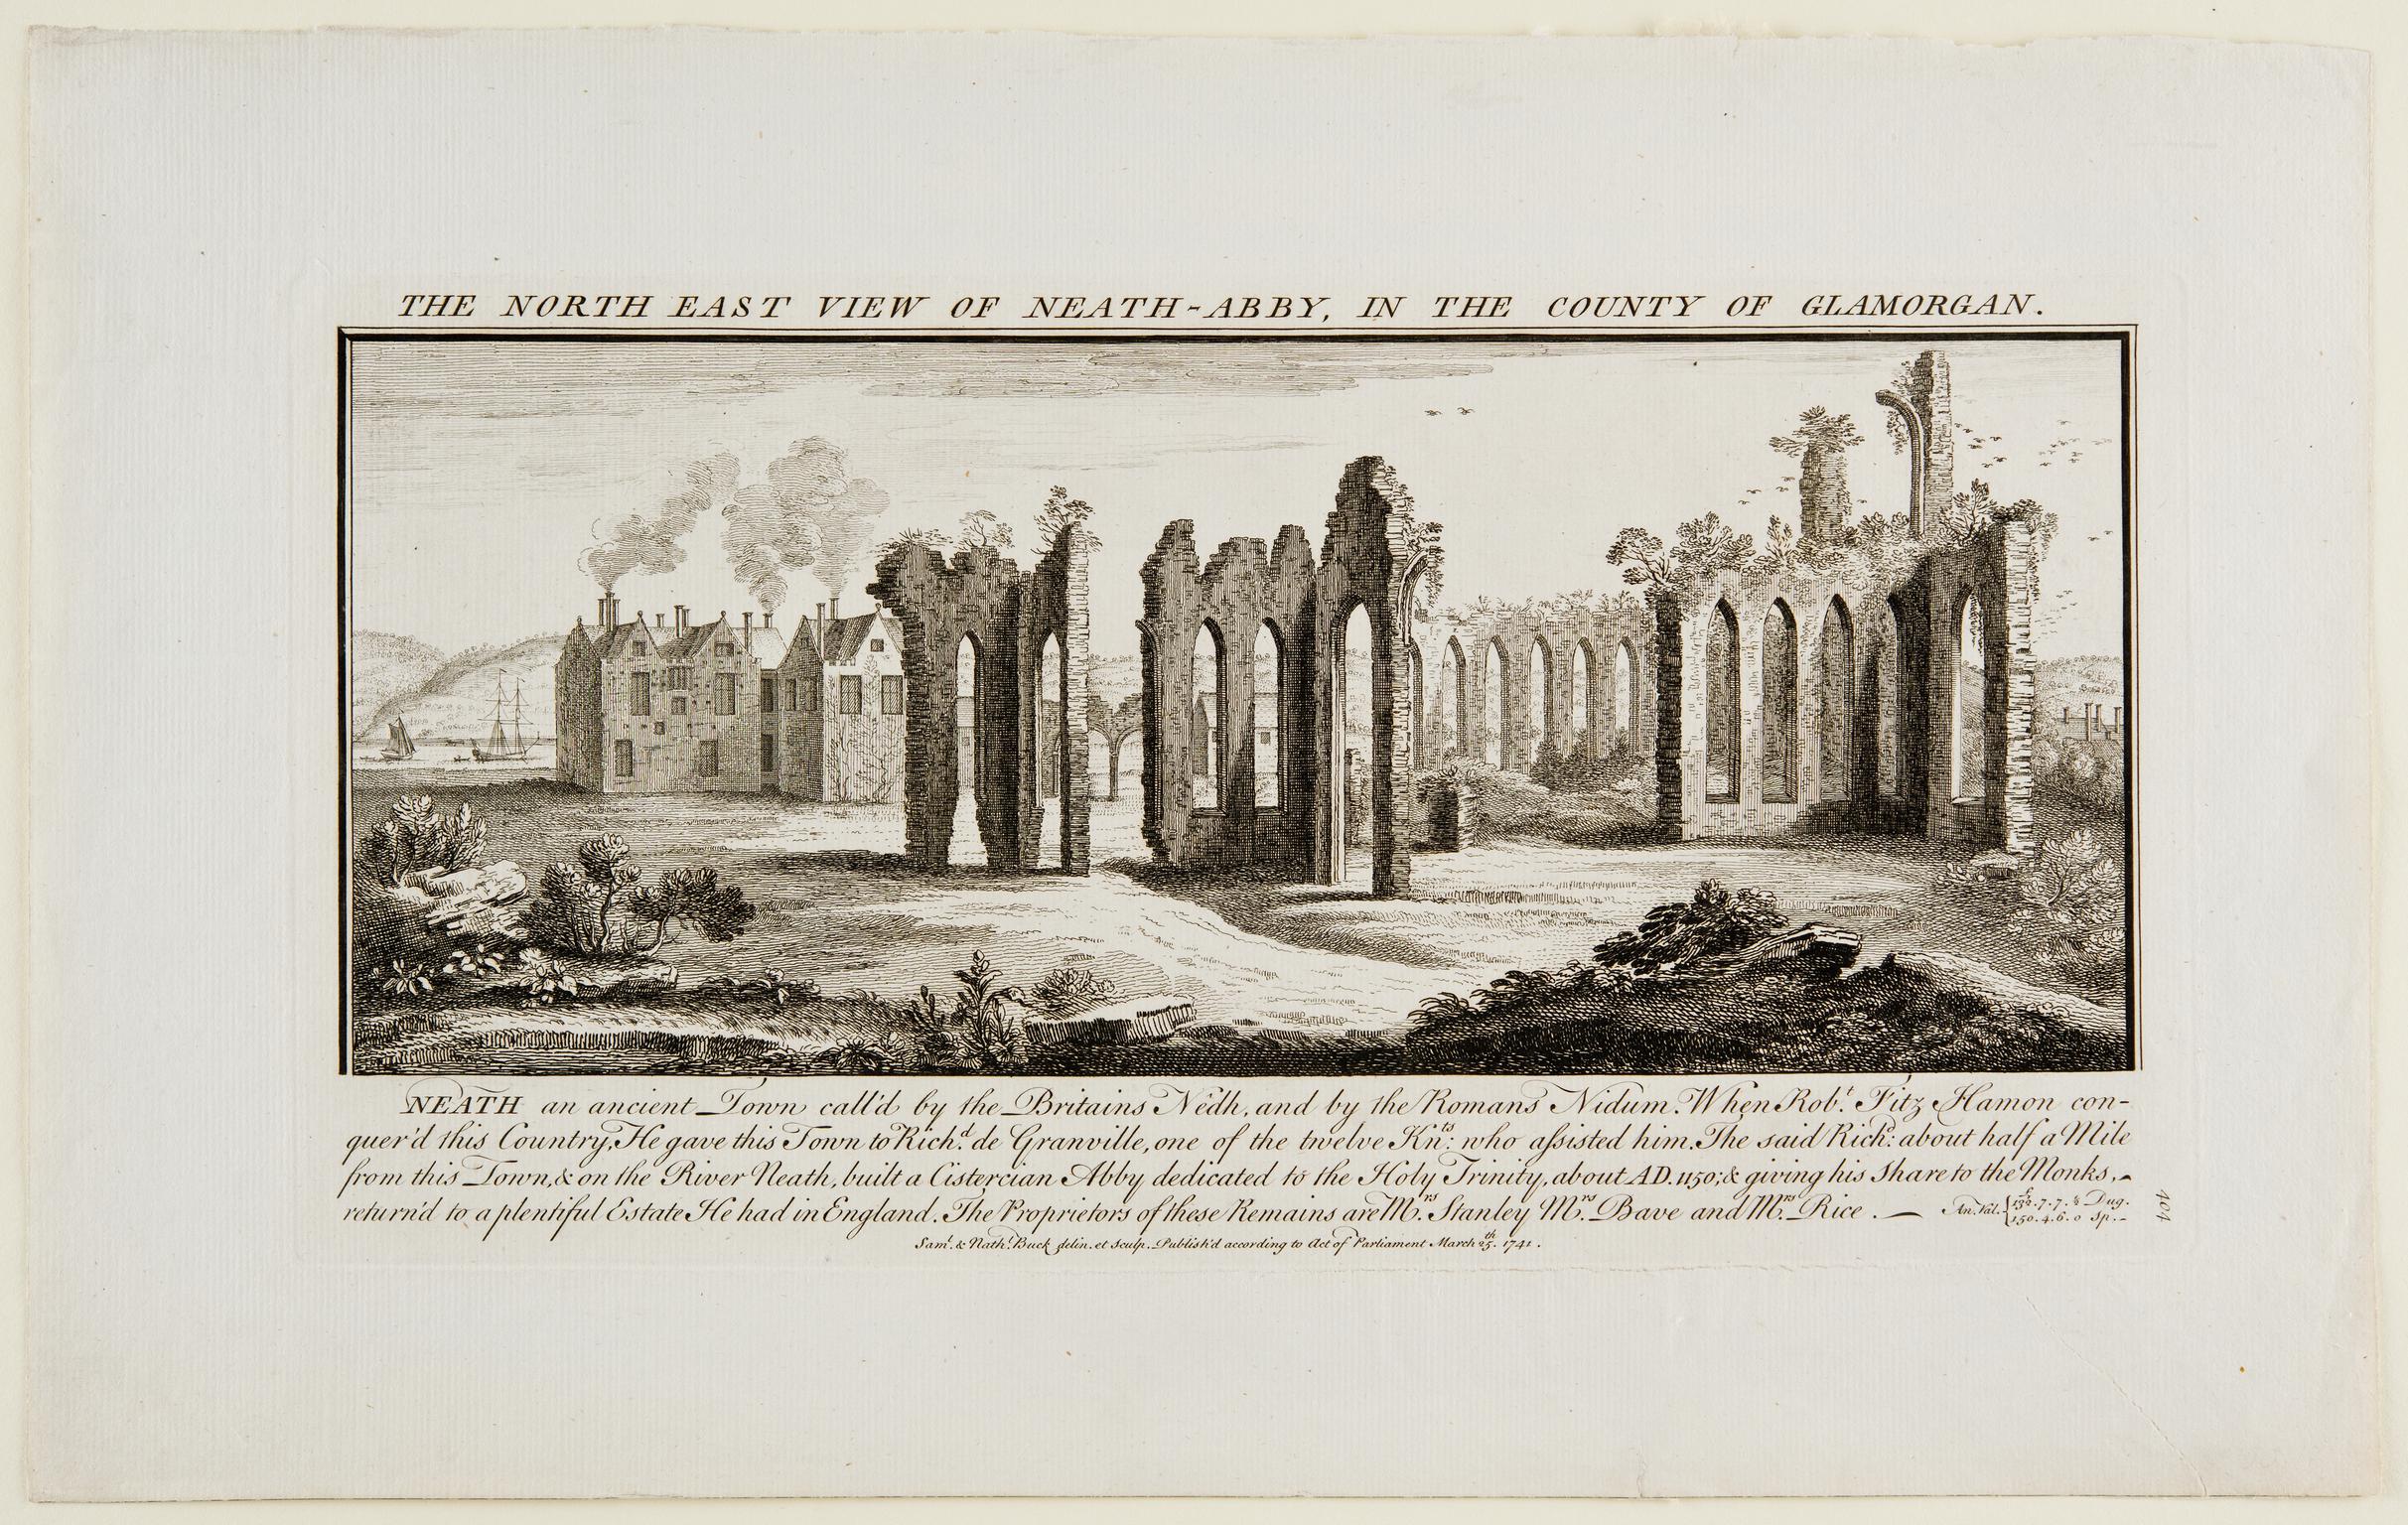 The North East View of Neath Abbey, in the county of Glamorgan